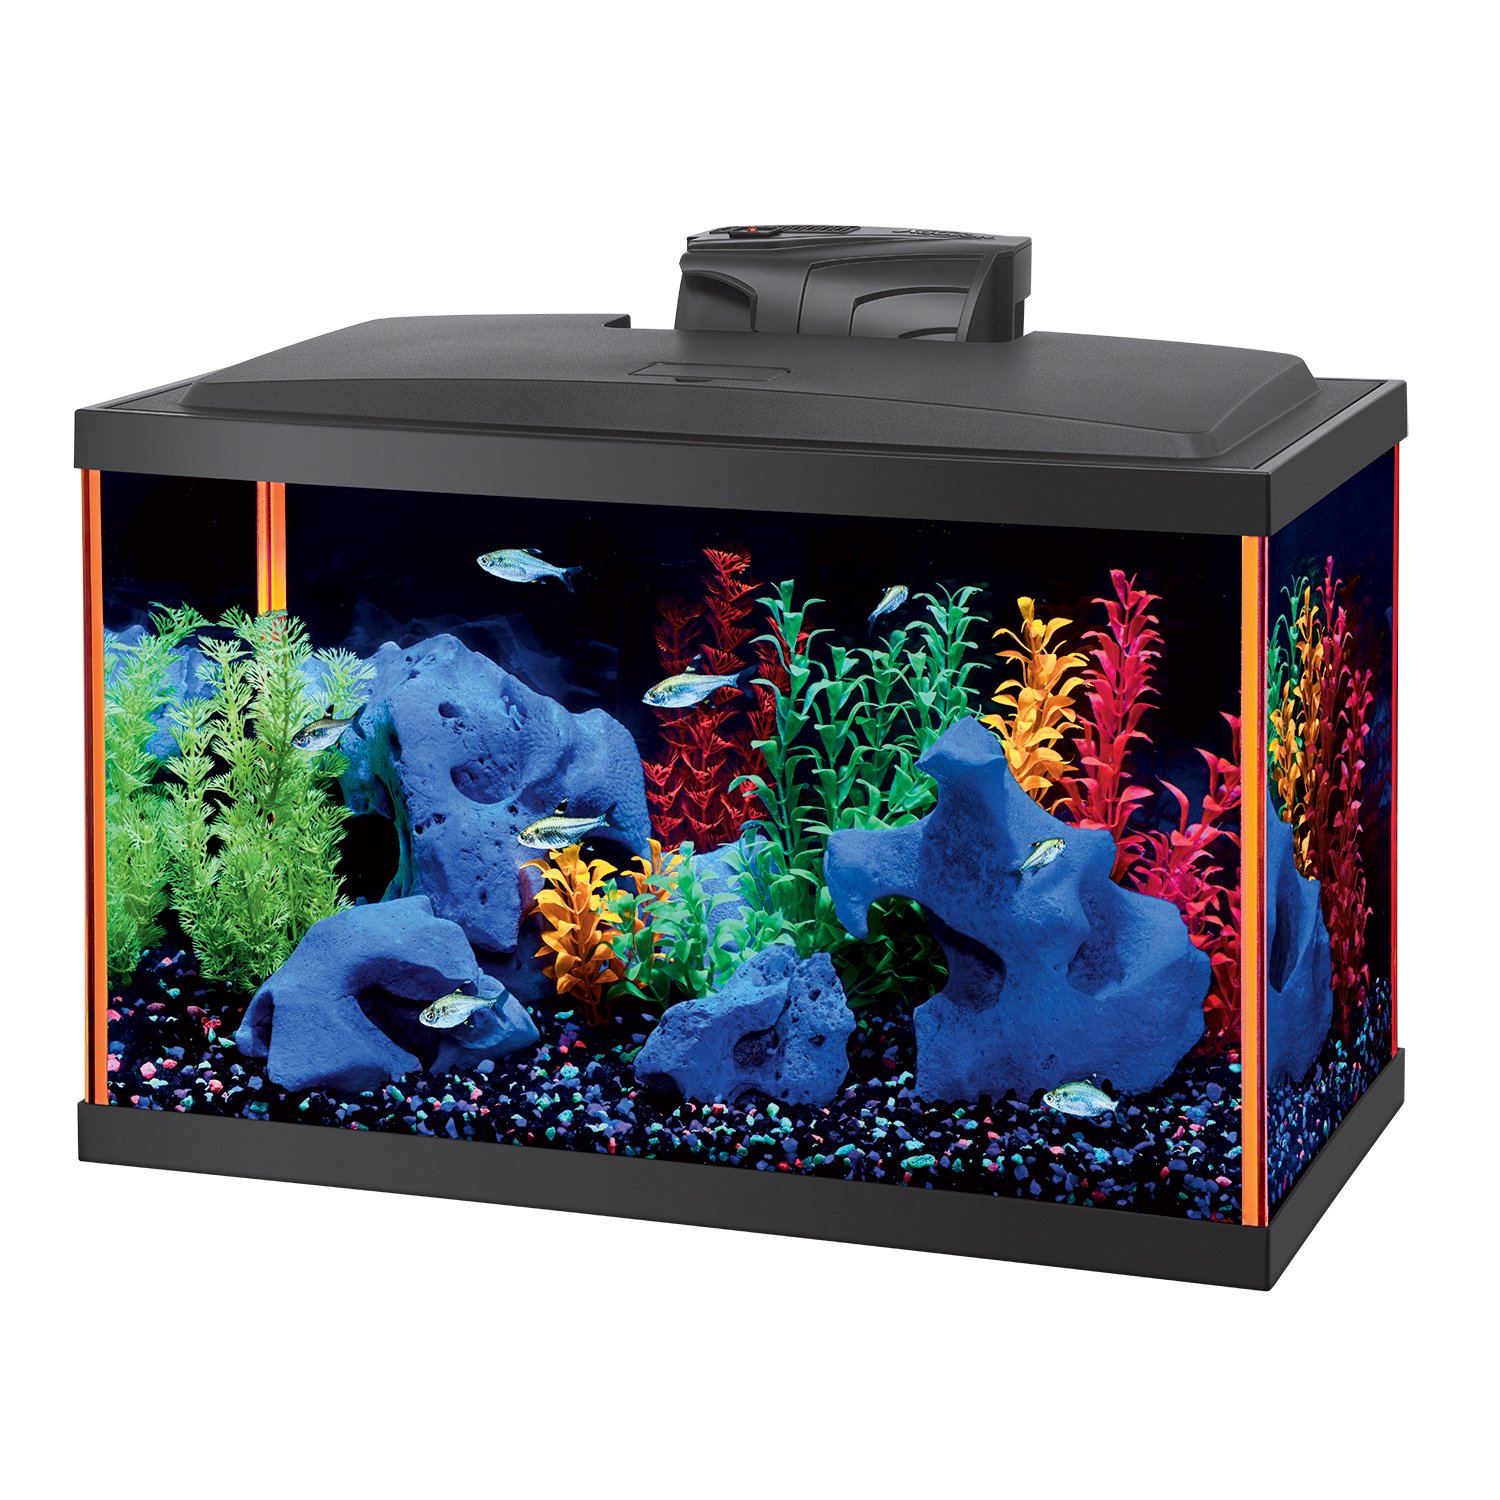 10g glofish tank. Nothing special. Just something simple to get my 2 year  old excited about the effects. : r/Aquariums